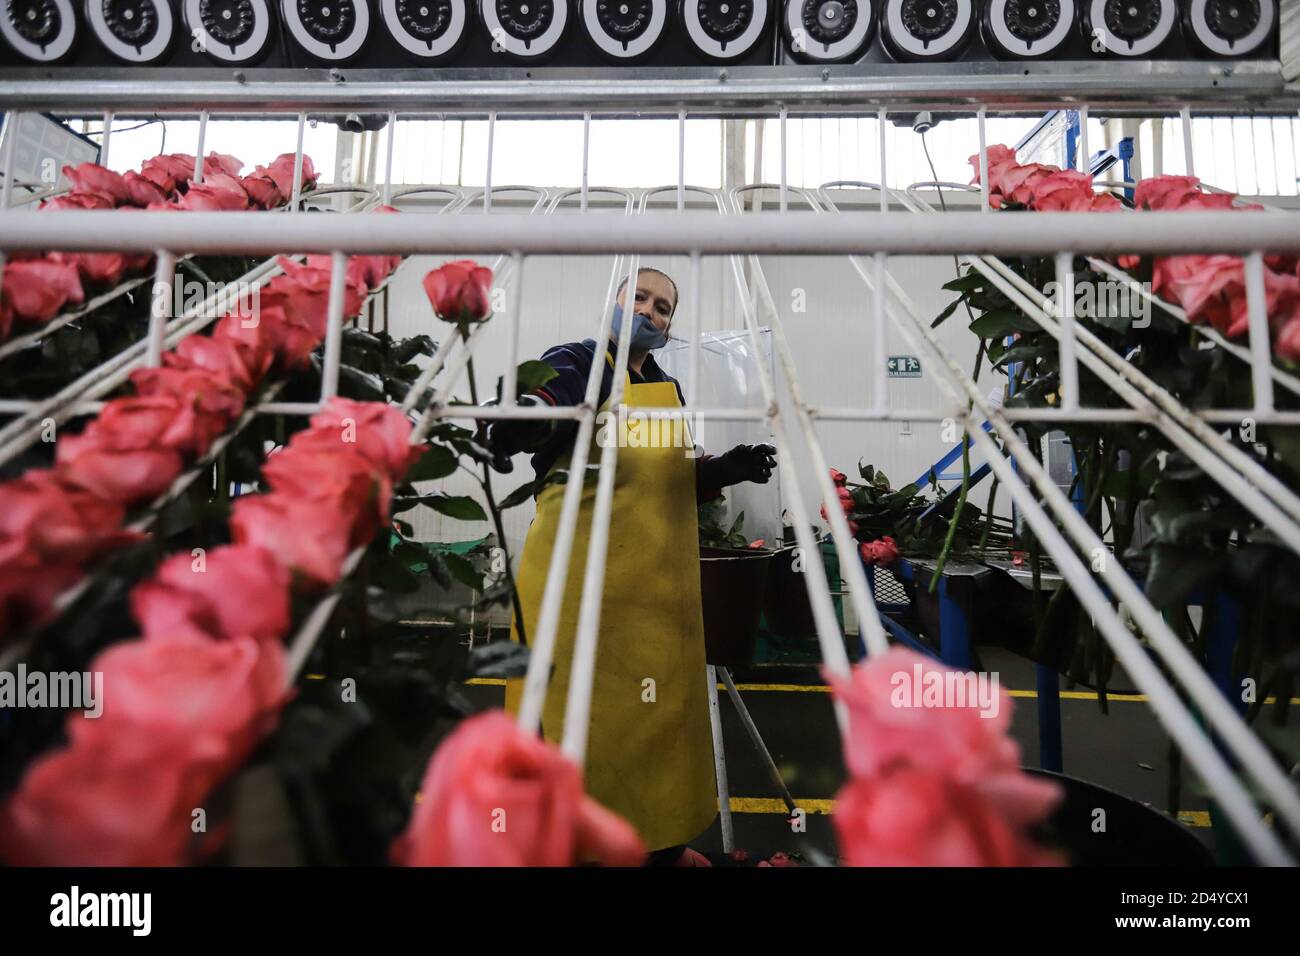 Guasca, Colombia. 7th Oct, 2020. A staff member arranges flowers collected from Wayuu flower farm in Guasca, Colombia, on Oct. 7, 2020. The farm is well-known for its rose industry. Credit: Jhon Paz/Xinhua/Alamy Live News Stock Photo